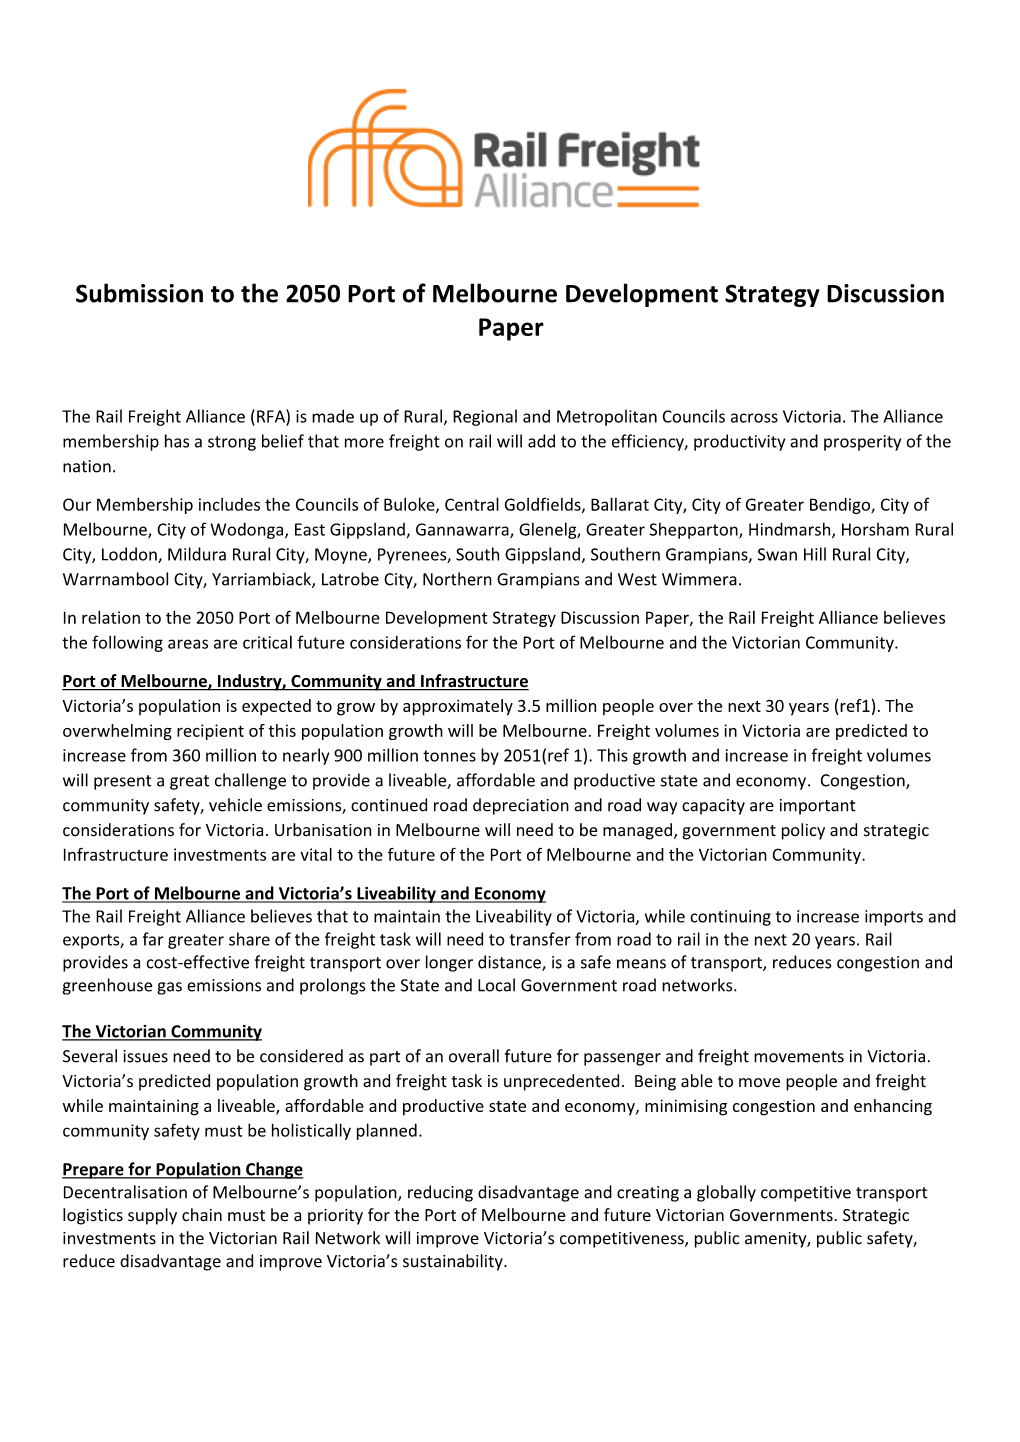 Submission to the 2050 Port of Melbourne Development Strategy Discussion Paper